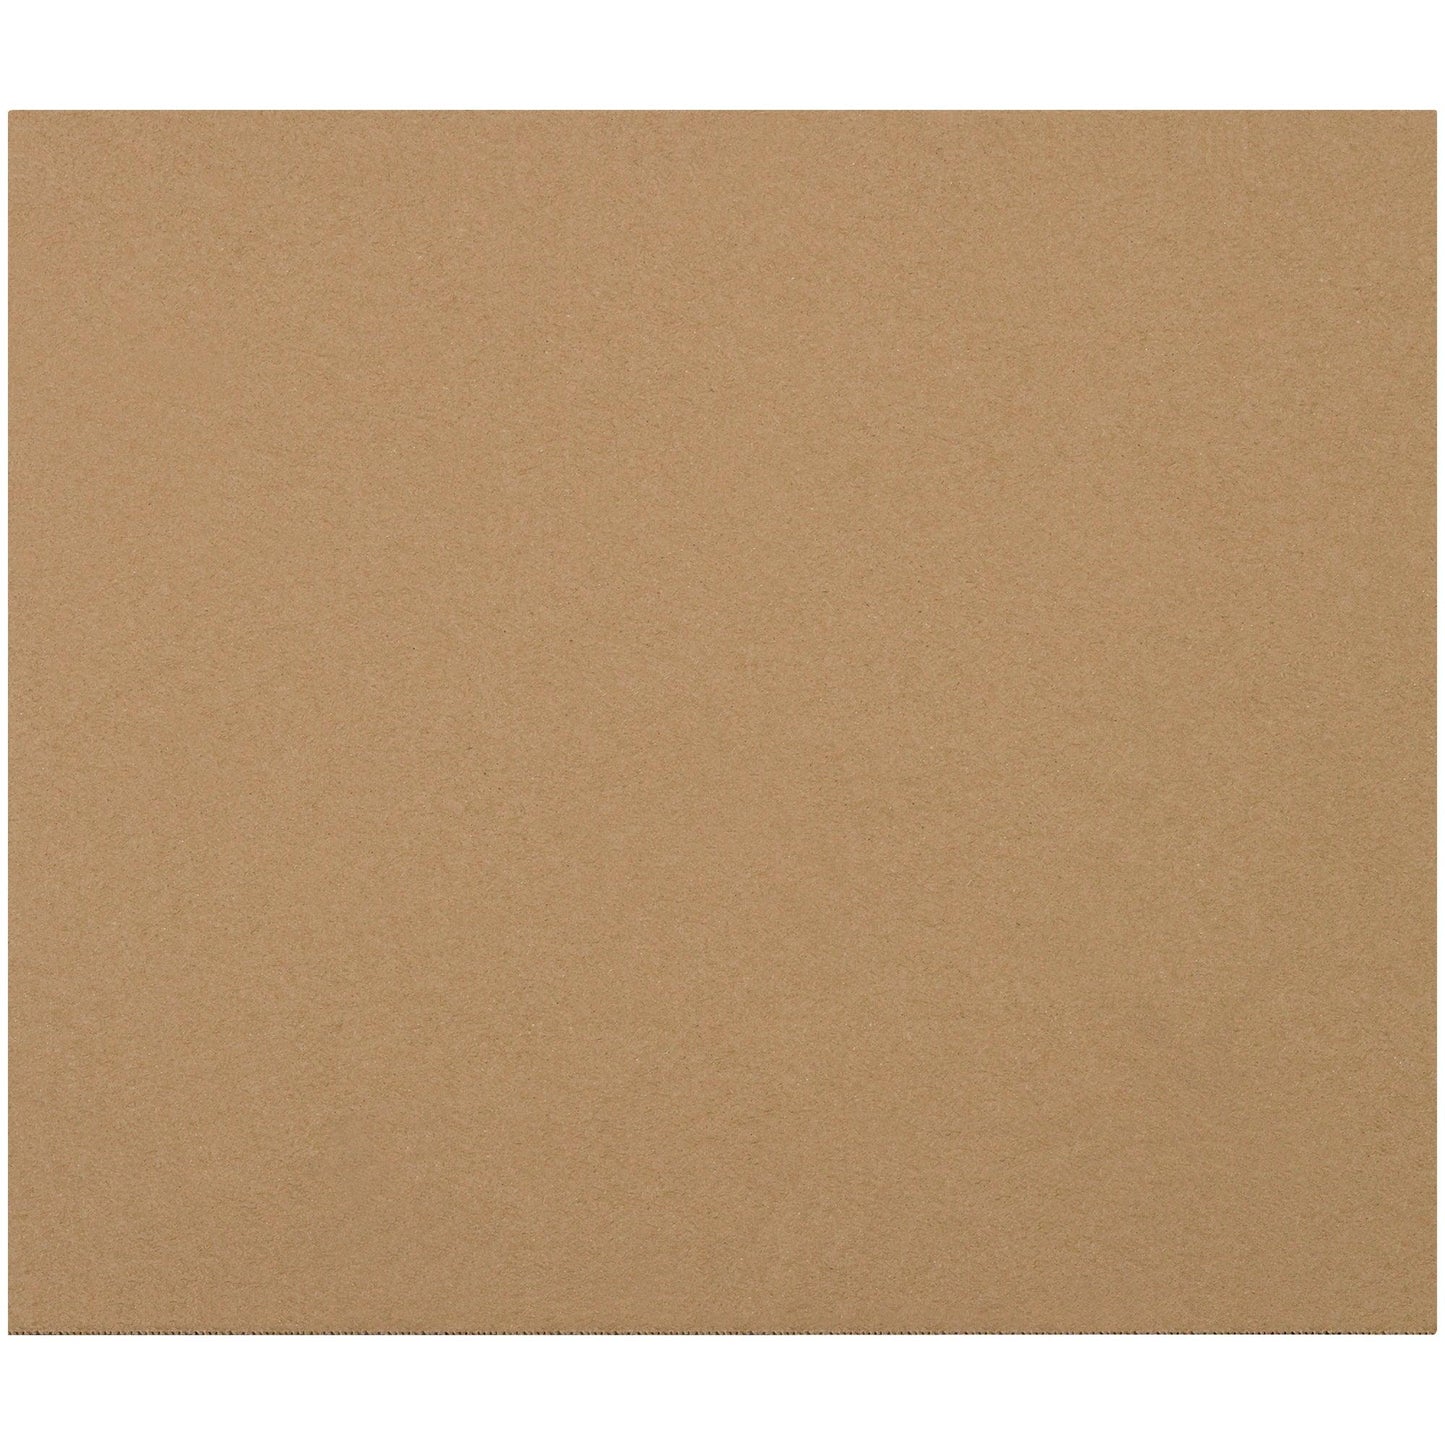 11 7/8 x 13 7/8" Corrugated Layer Pads - SP1113